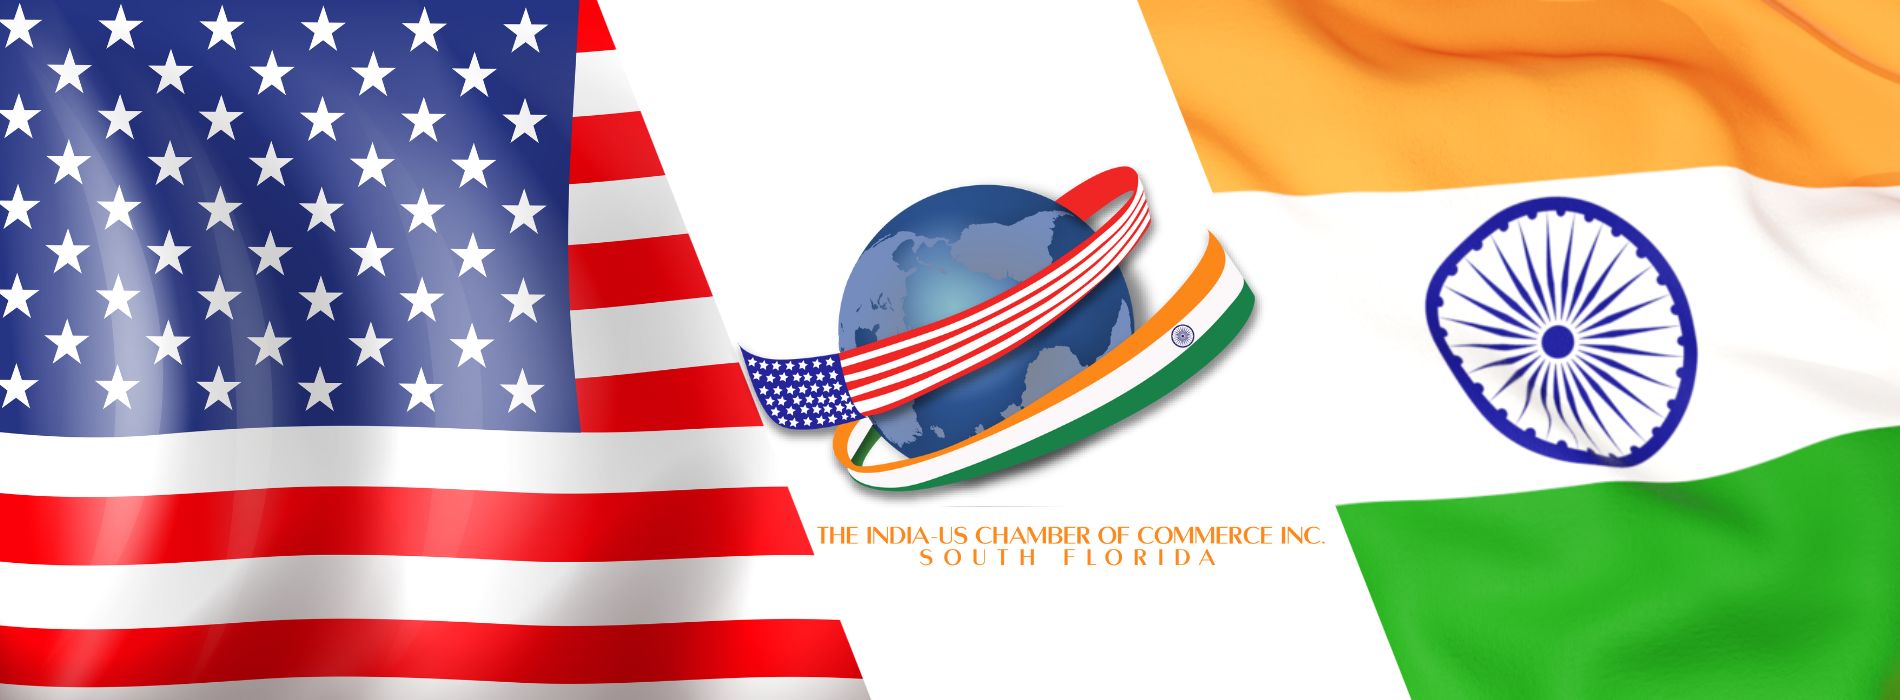 india-us-chamber-of-commerce-south-florida